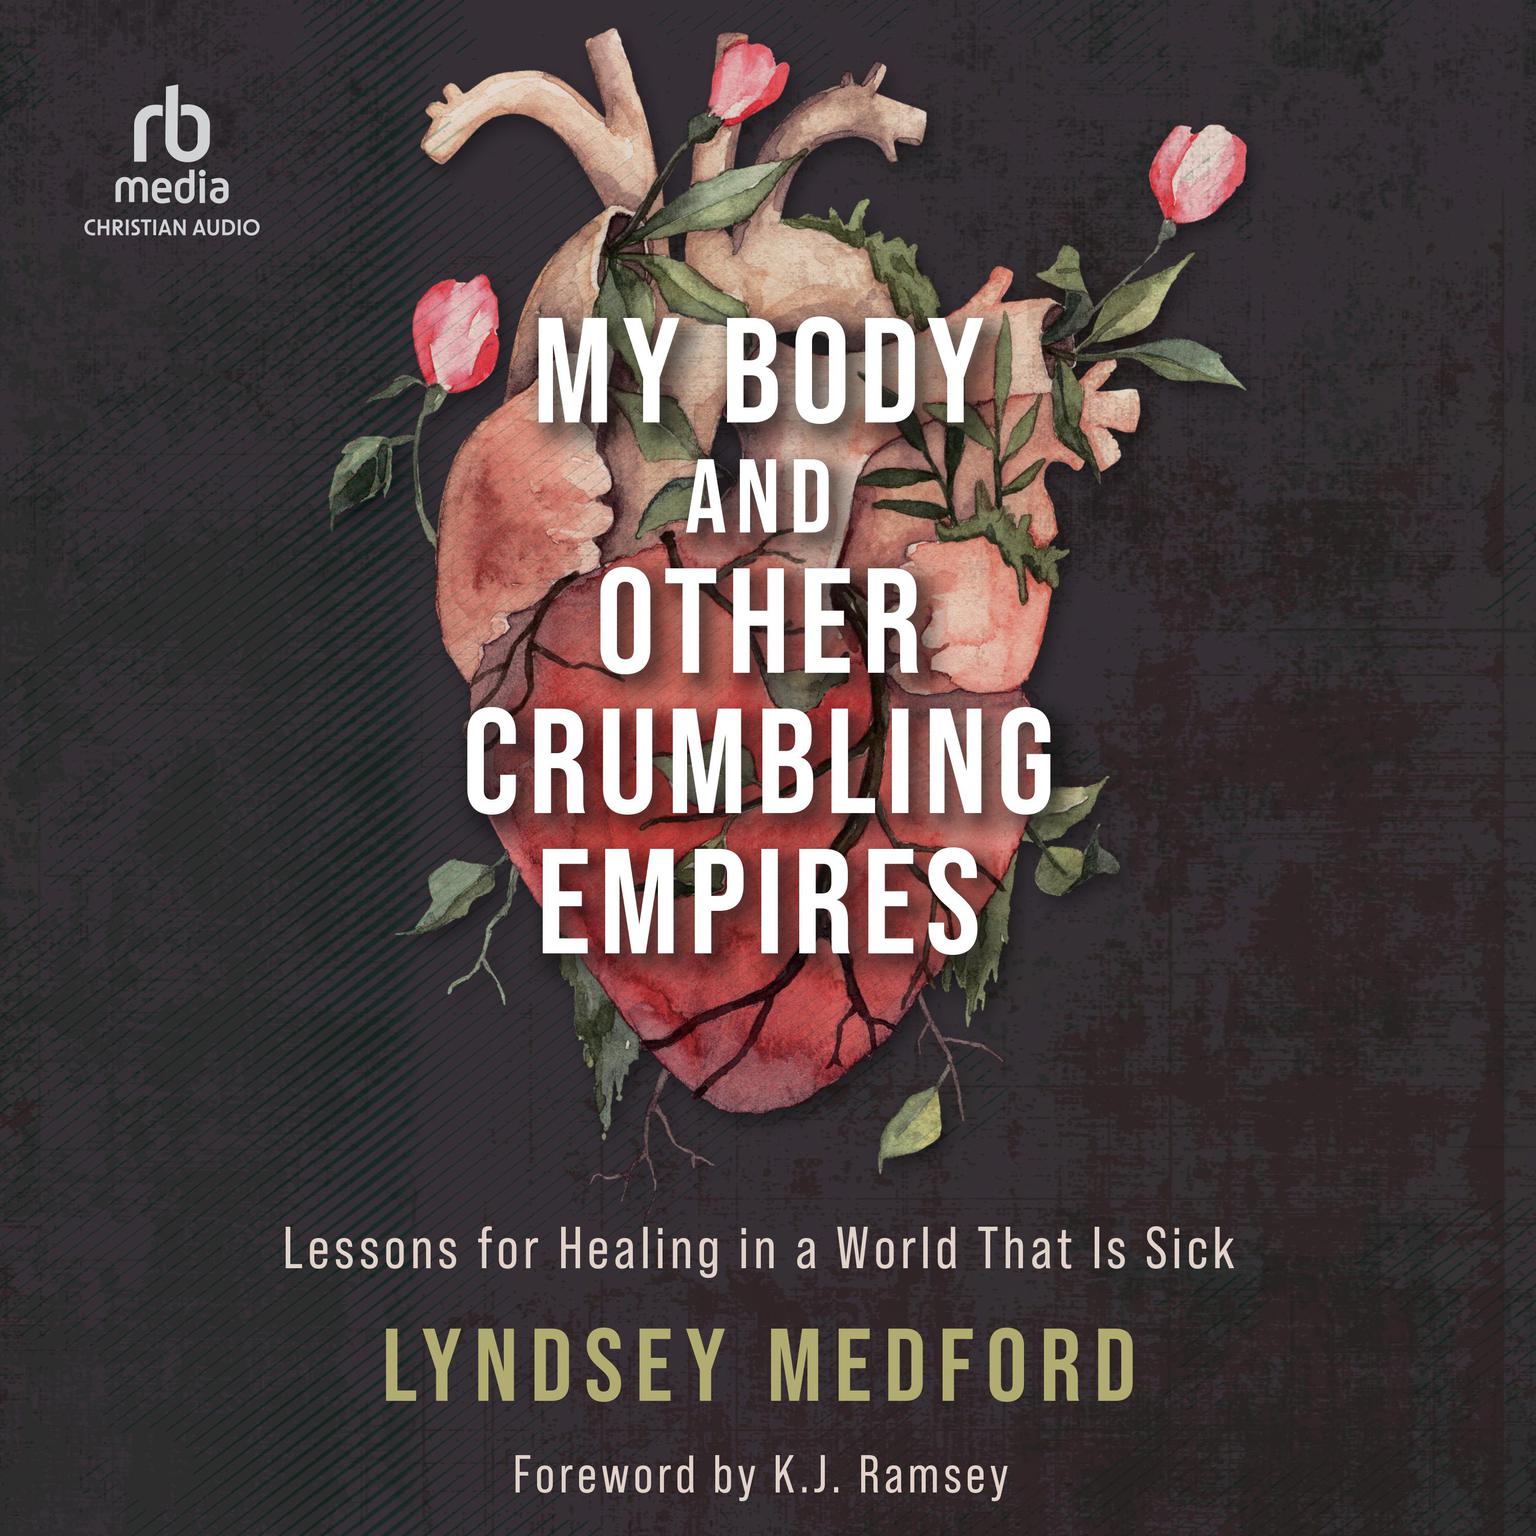 My Body and Other Crumbling Empires: Lessons for Healing in a World That Is Sick Audiobook, by Lyndsey Medford